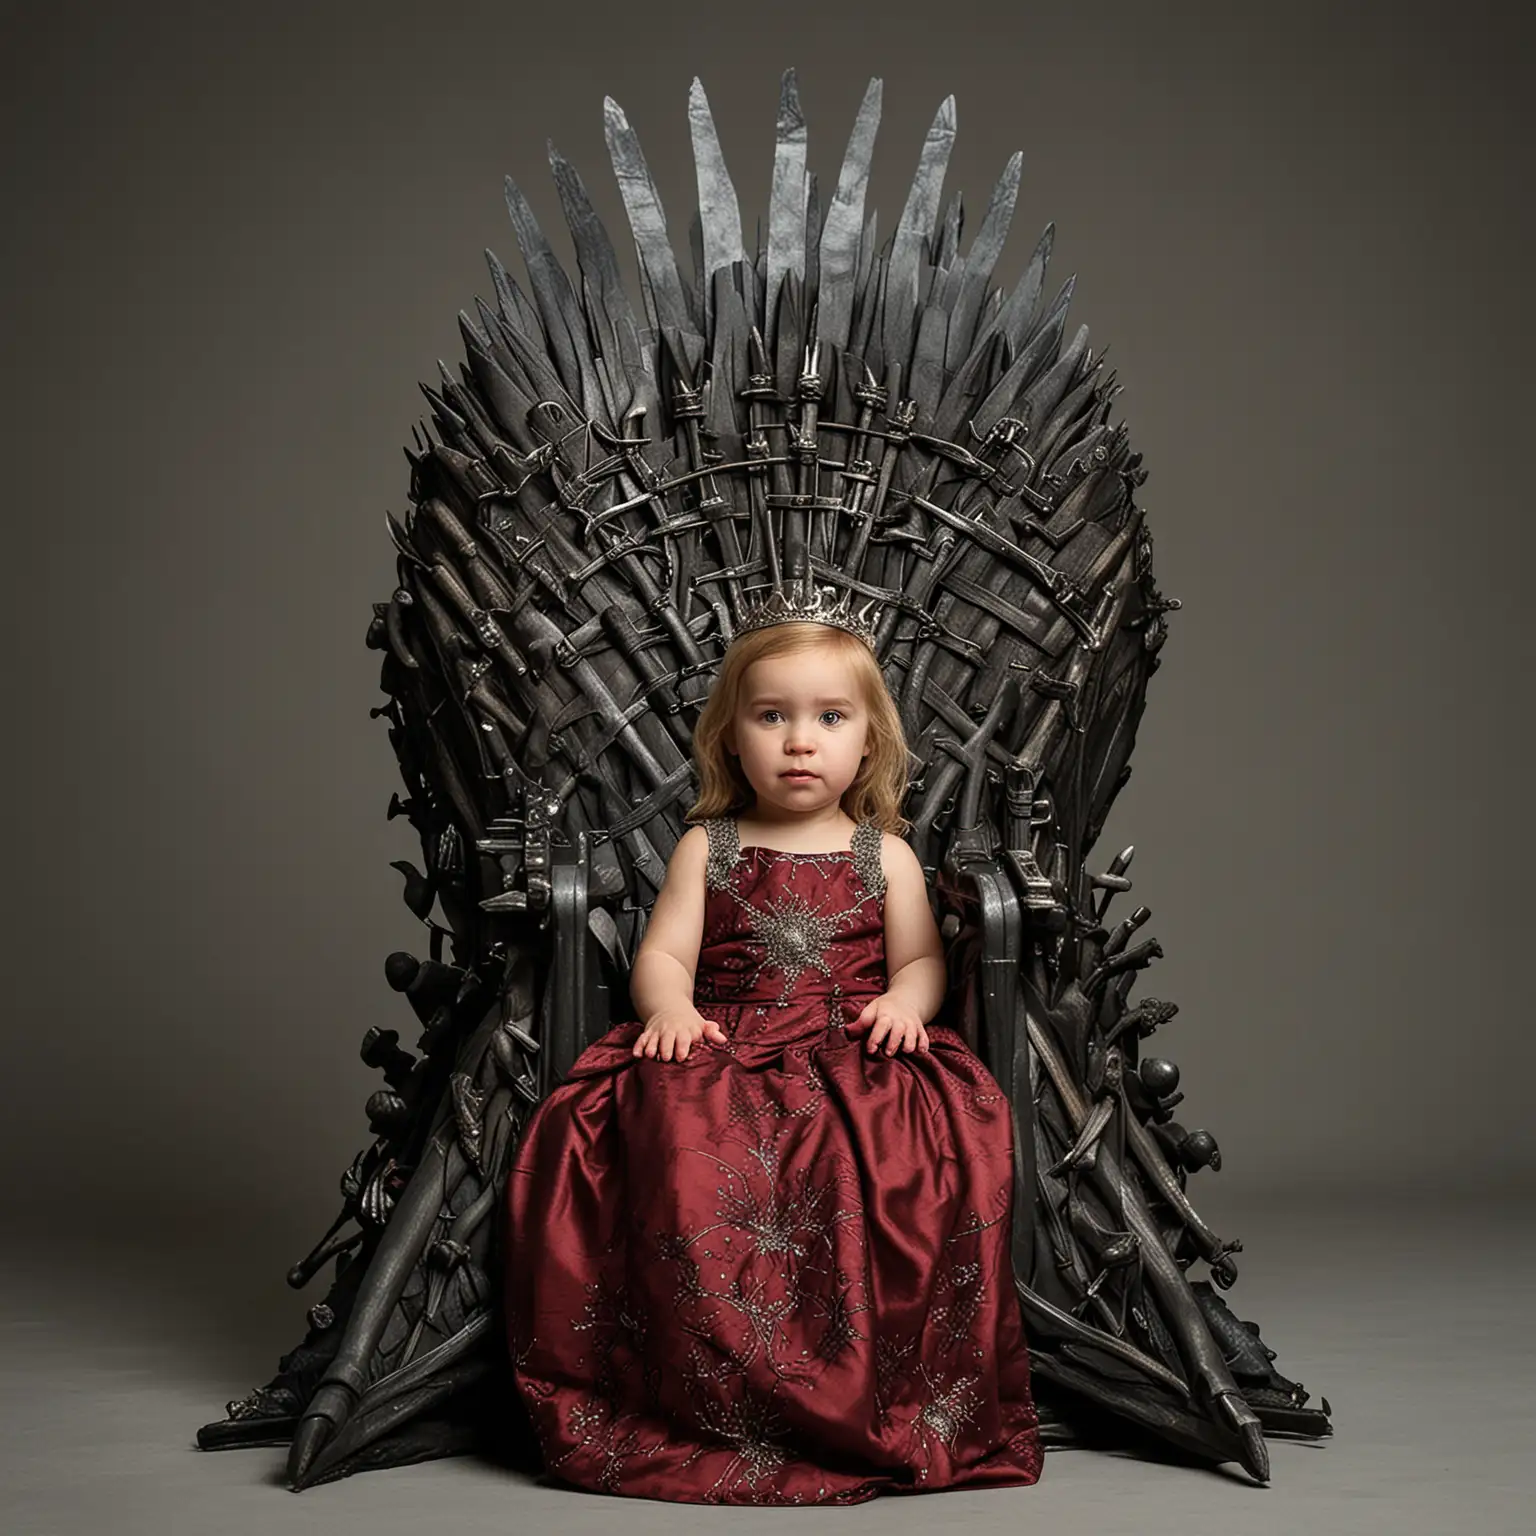 a two-year-old girl sitting on the iron throne from the series game of thrones with a typical dress from the series
